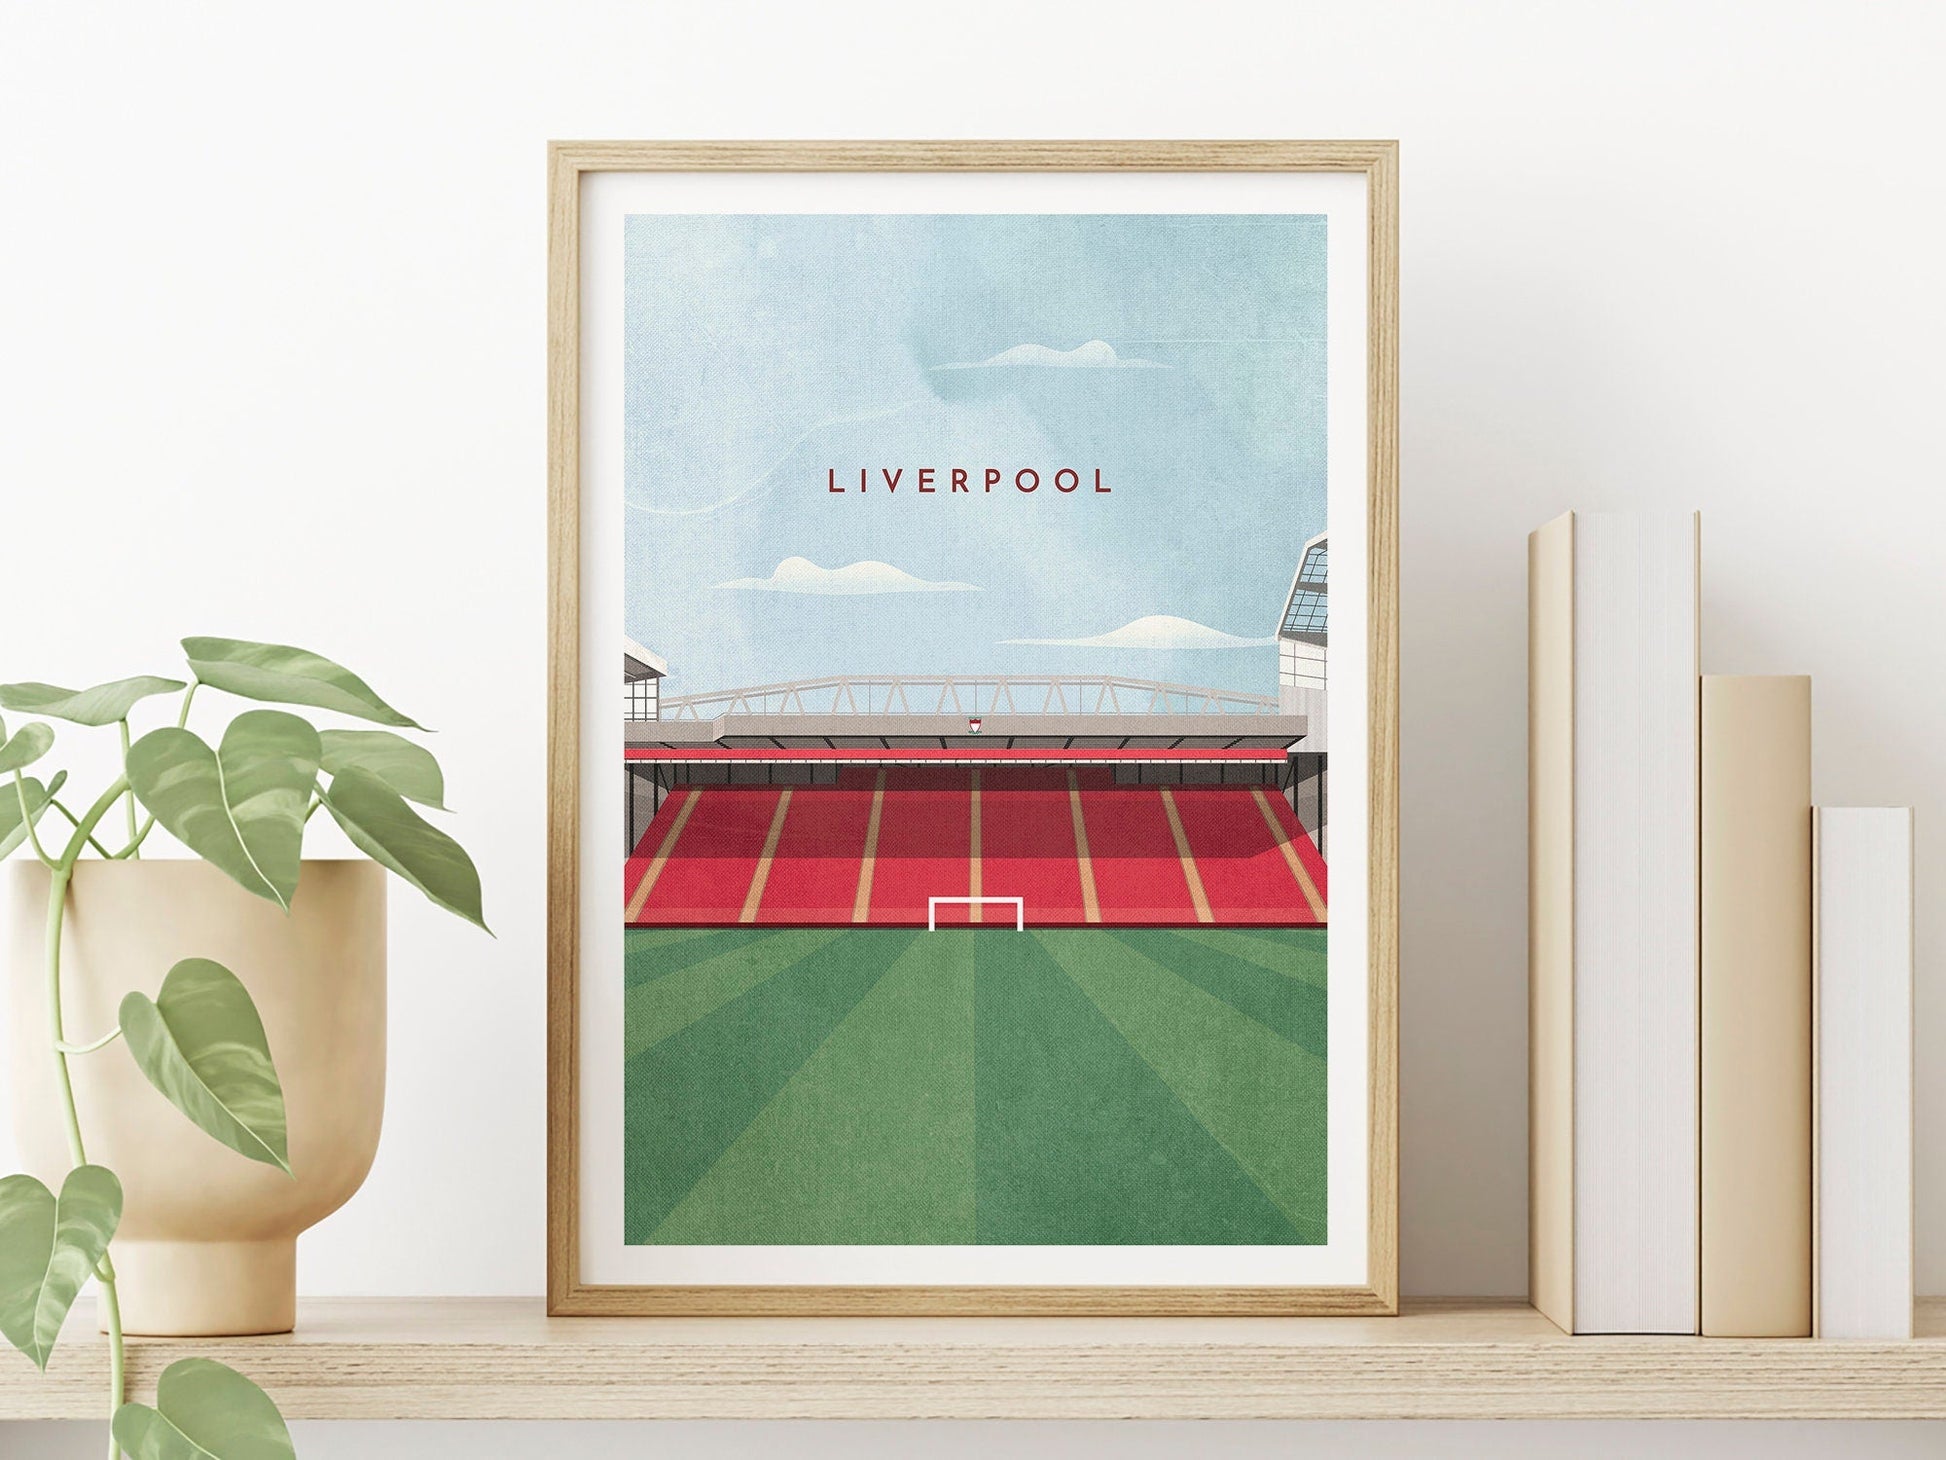 Liverpool Print Gift, Anfield Illustration Retro Style, The Kop Poster, Gift For Him Her, Present for Footy Fan - Turf Football Art